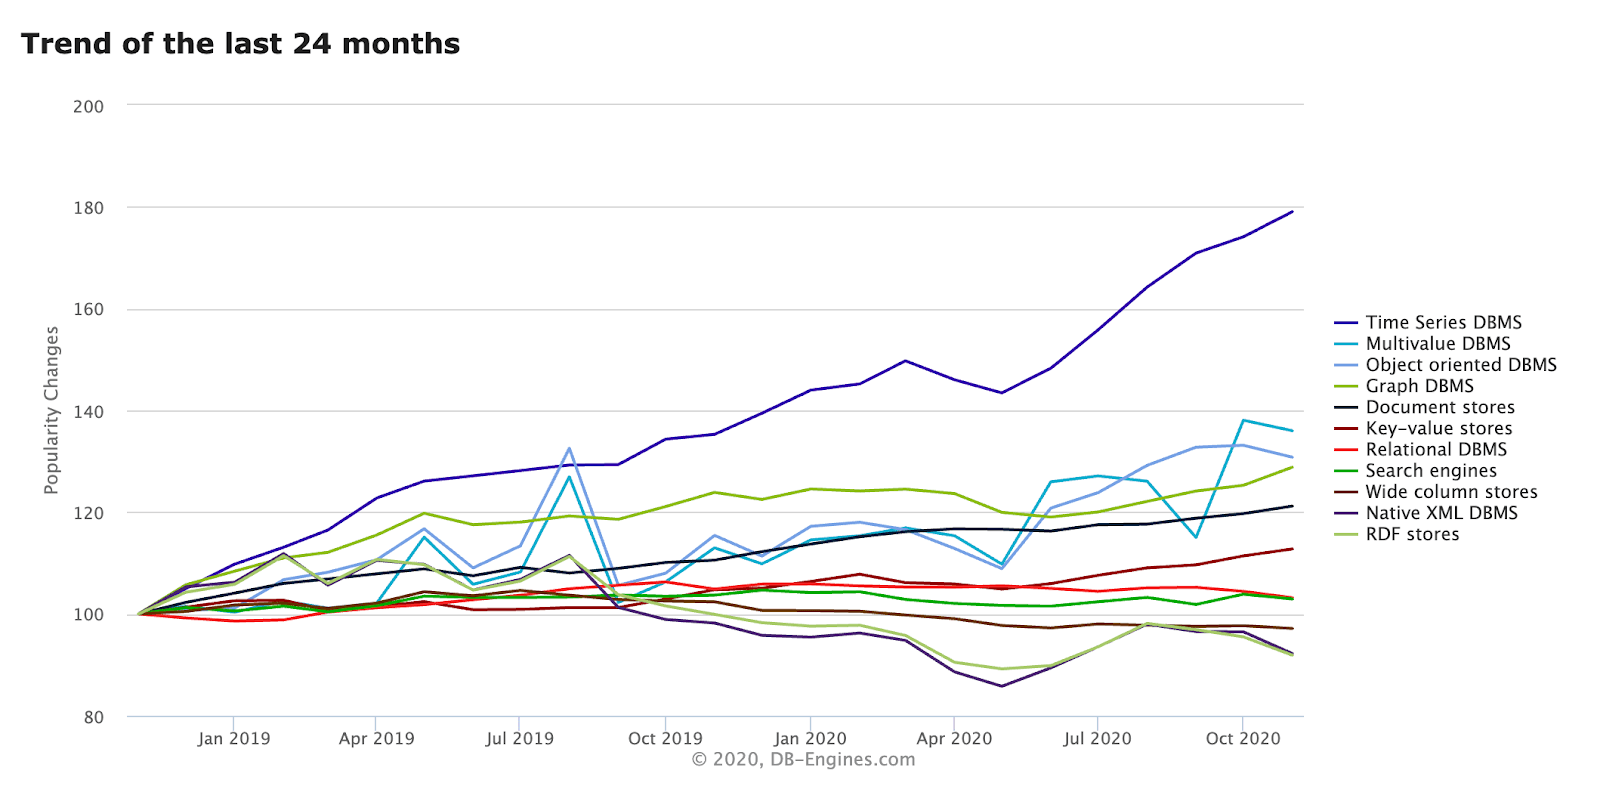 Time-series data, showing 24 month trend in DBMS popularity